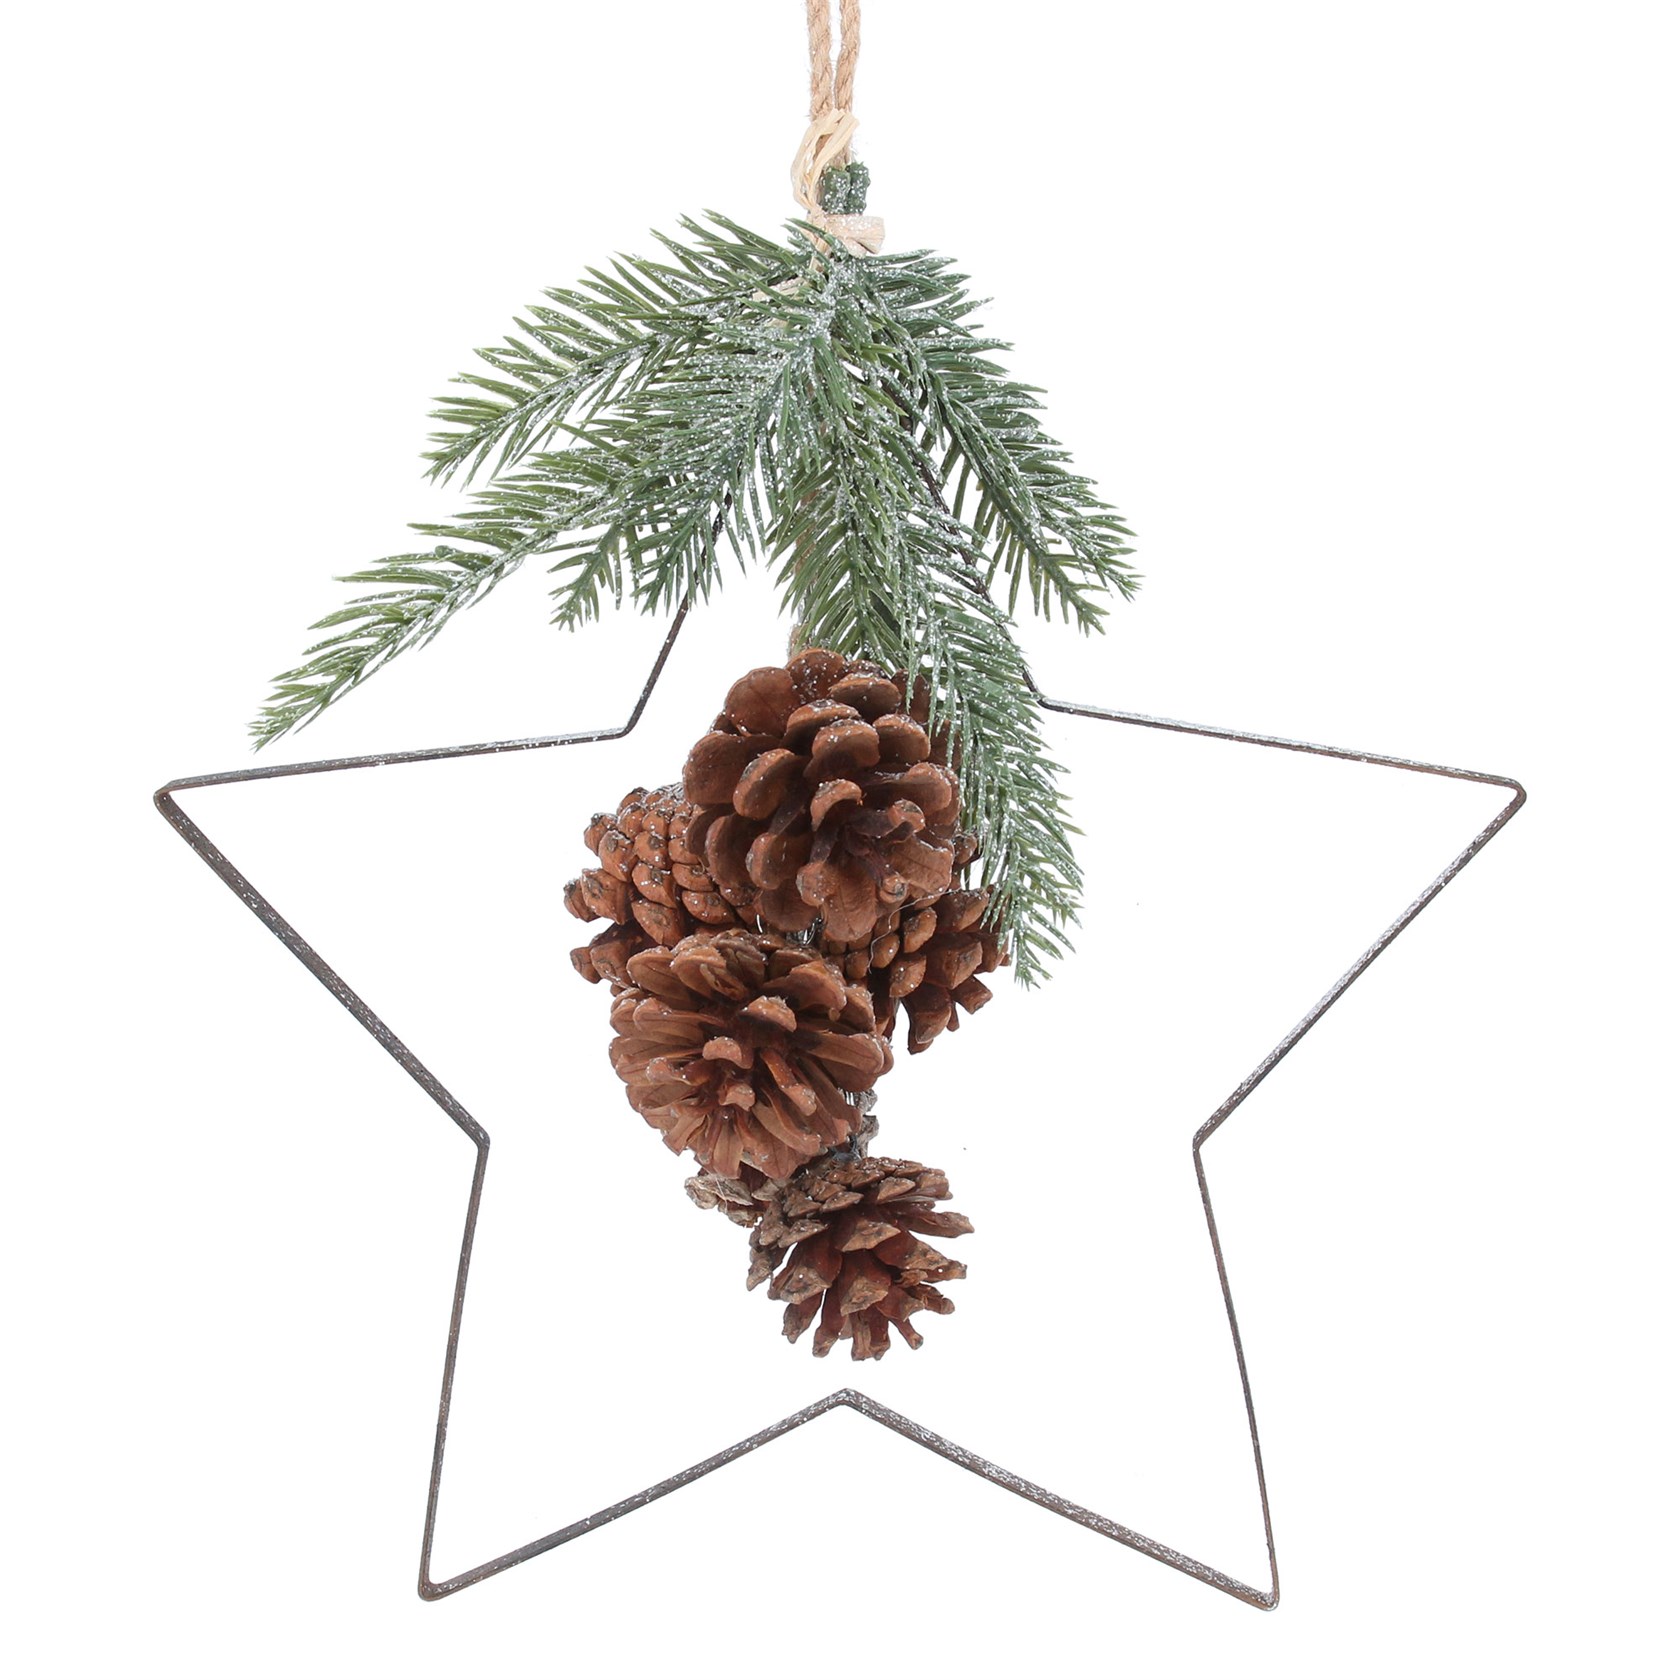 Metal cut out star hanging Christmas decoration with fir and cone detail. By Gisela Graham. The perfect festive addition to your home.